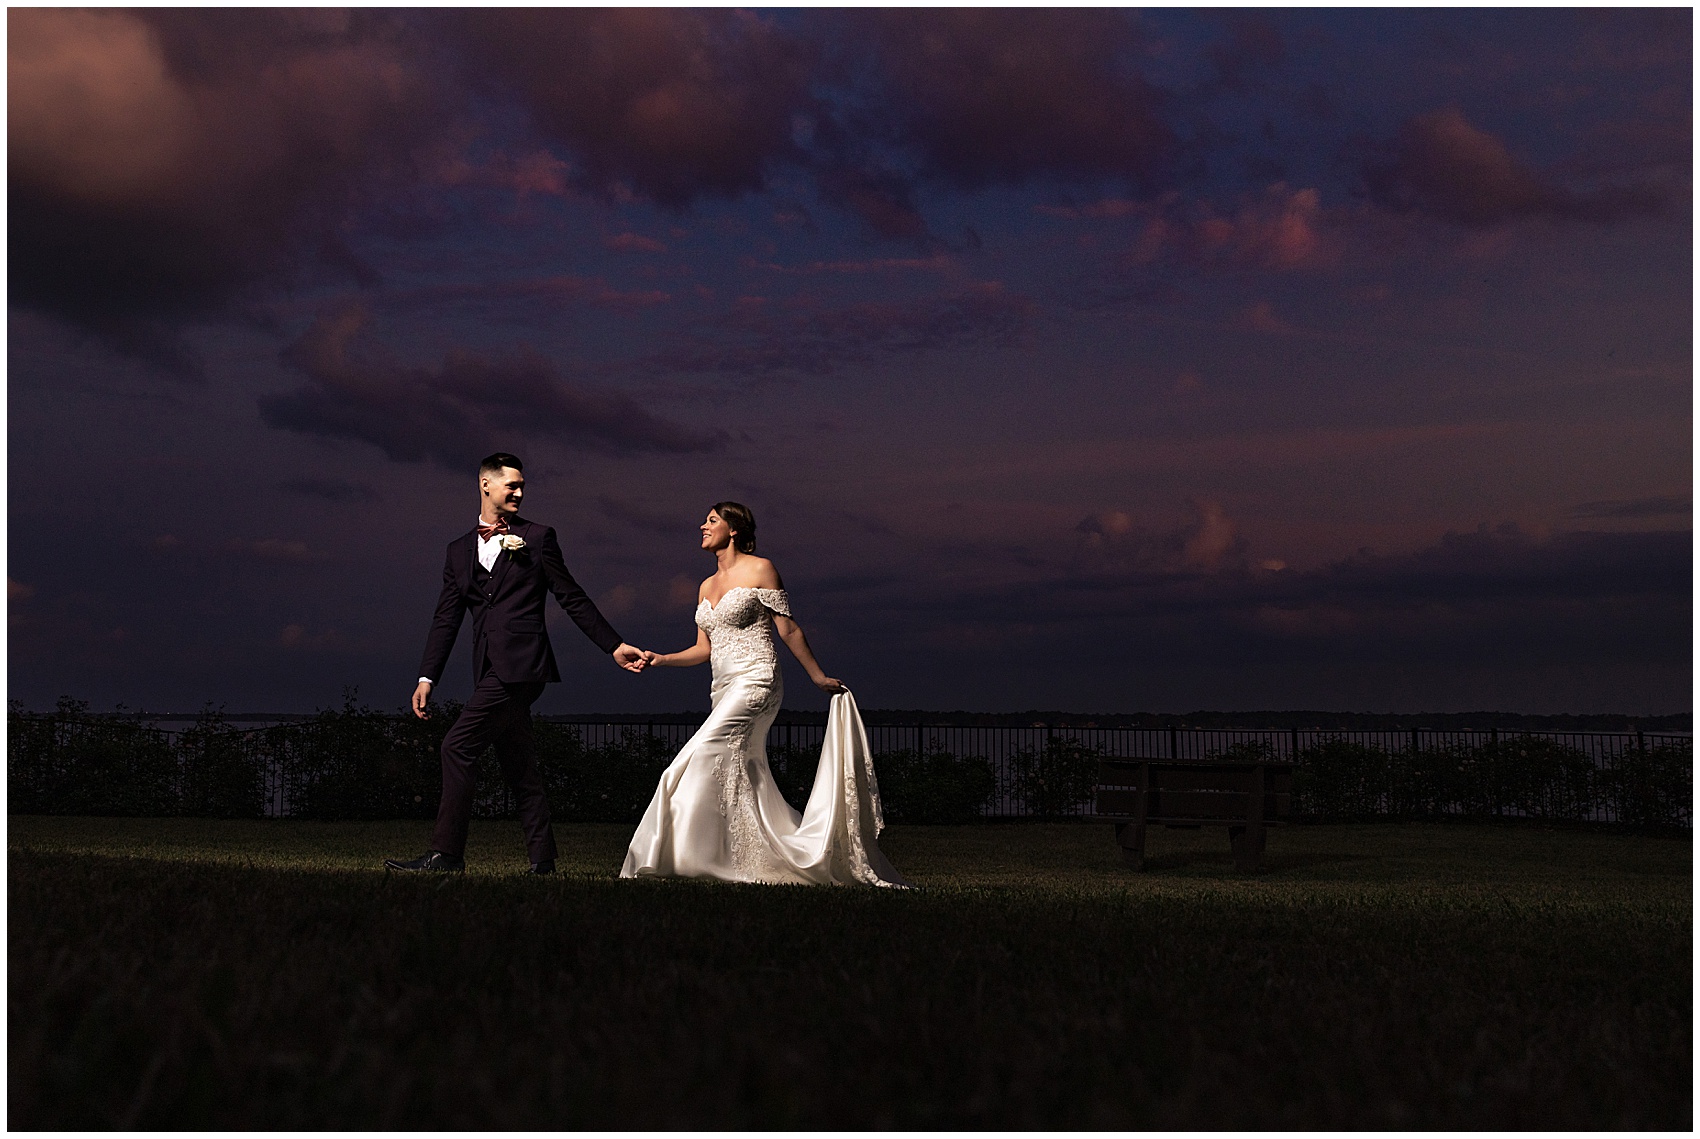 Newlyweds walk across a lawn at sunset holding hands at their club continental wedding